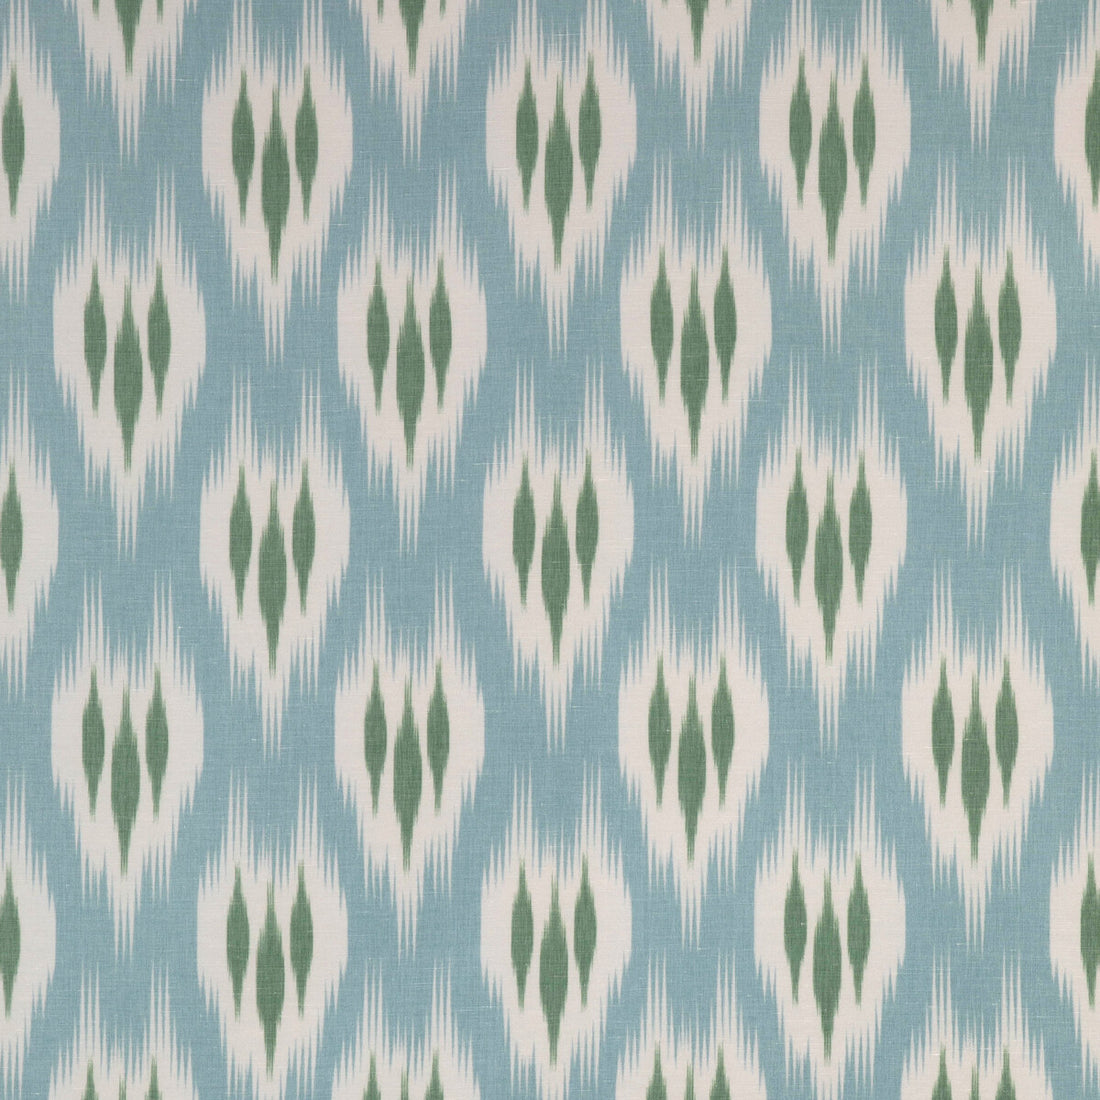 Clare Print fabric in sea color - pattern 2023102.353.0 - by Lee Jofa in the Clare Prints collection